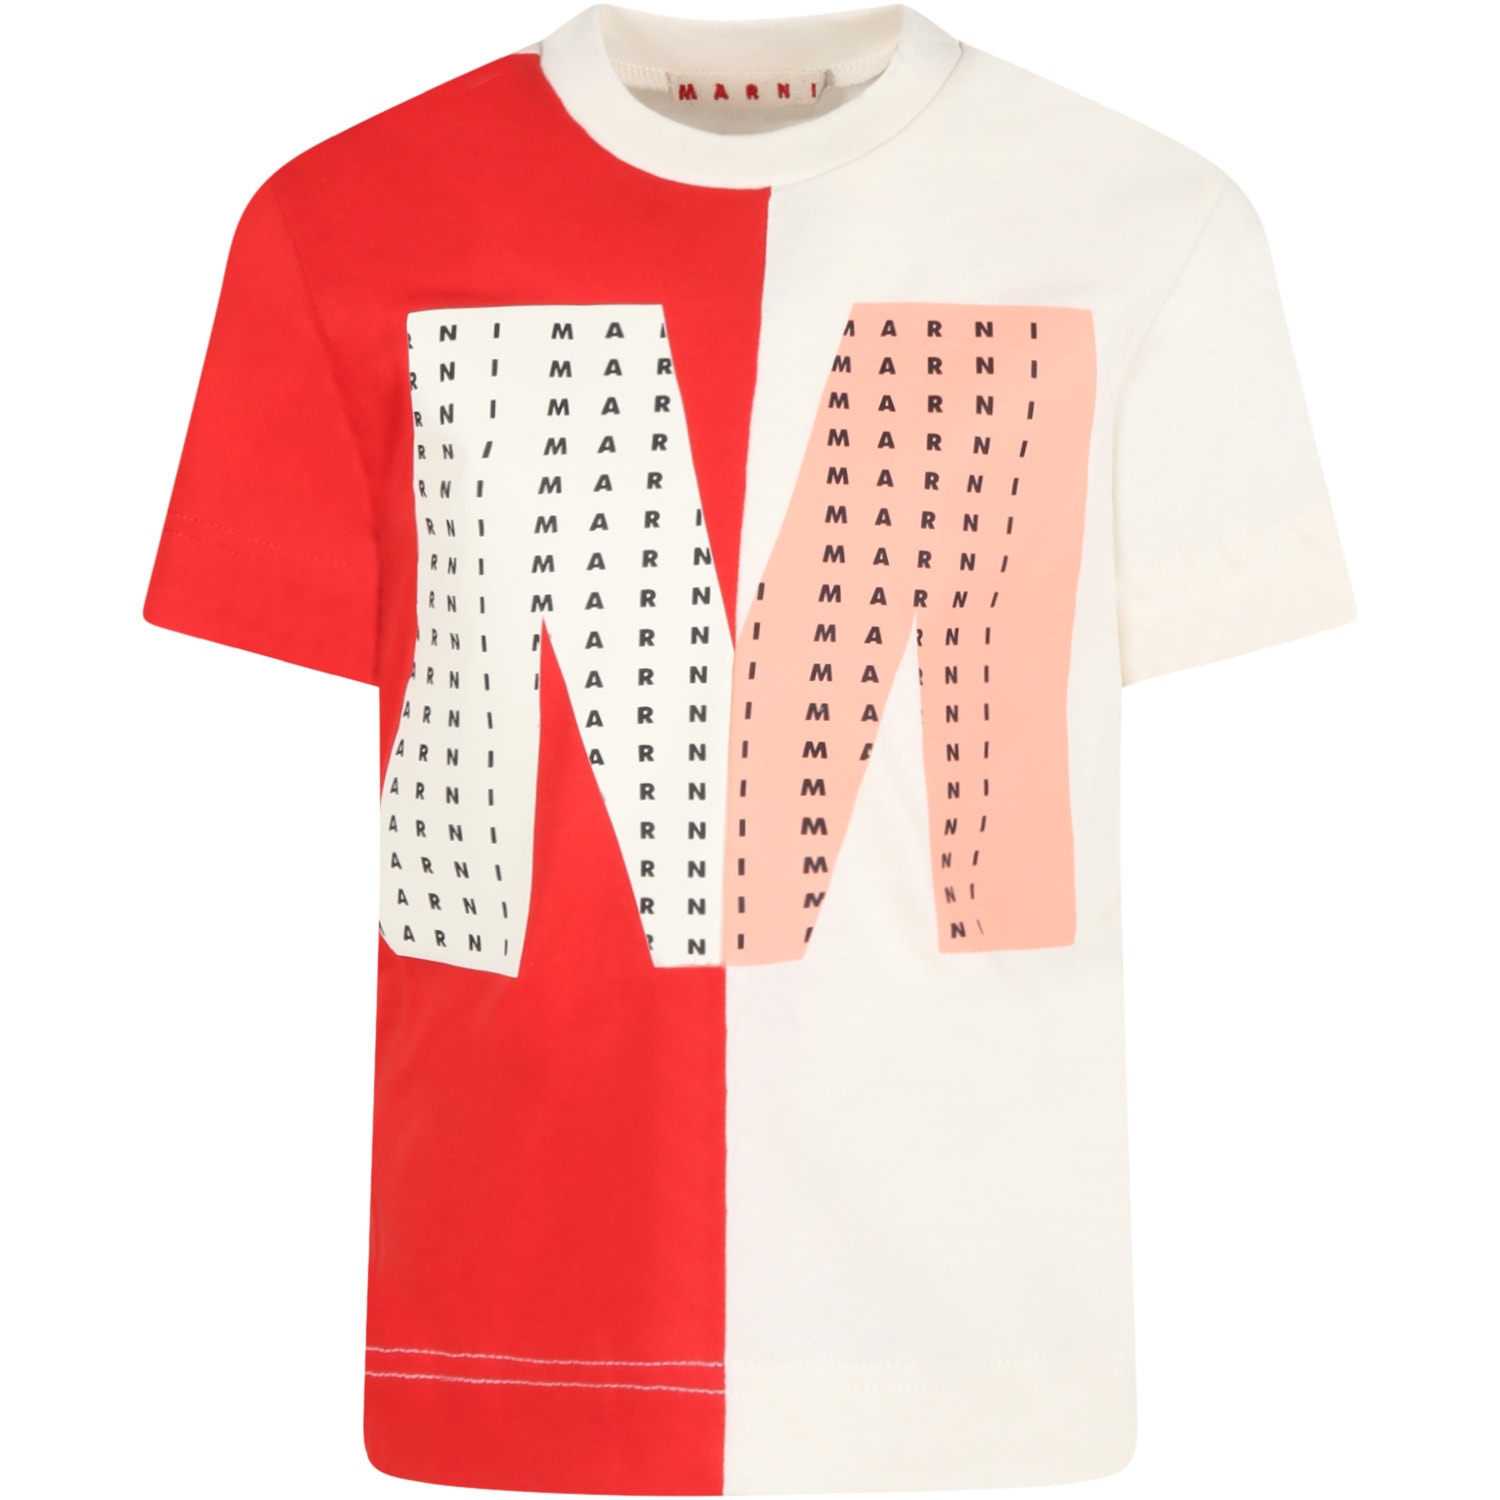 Marni Multicolor T-shirt For Kids With Logos